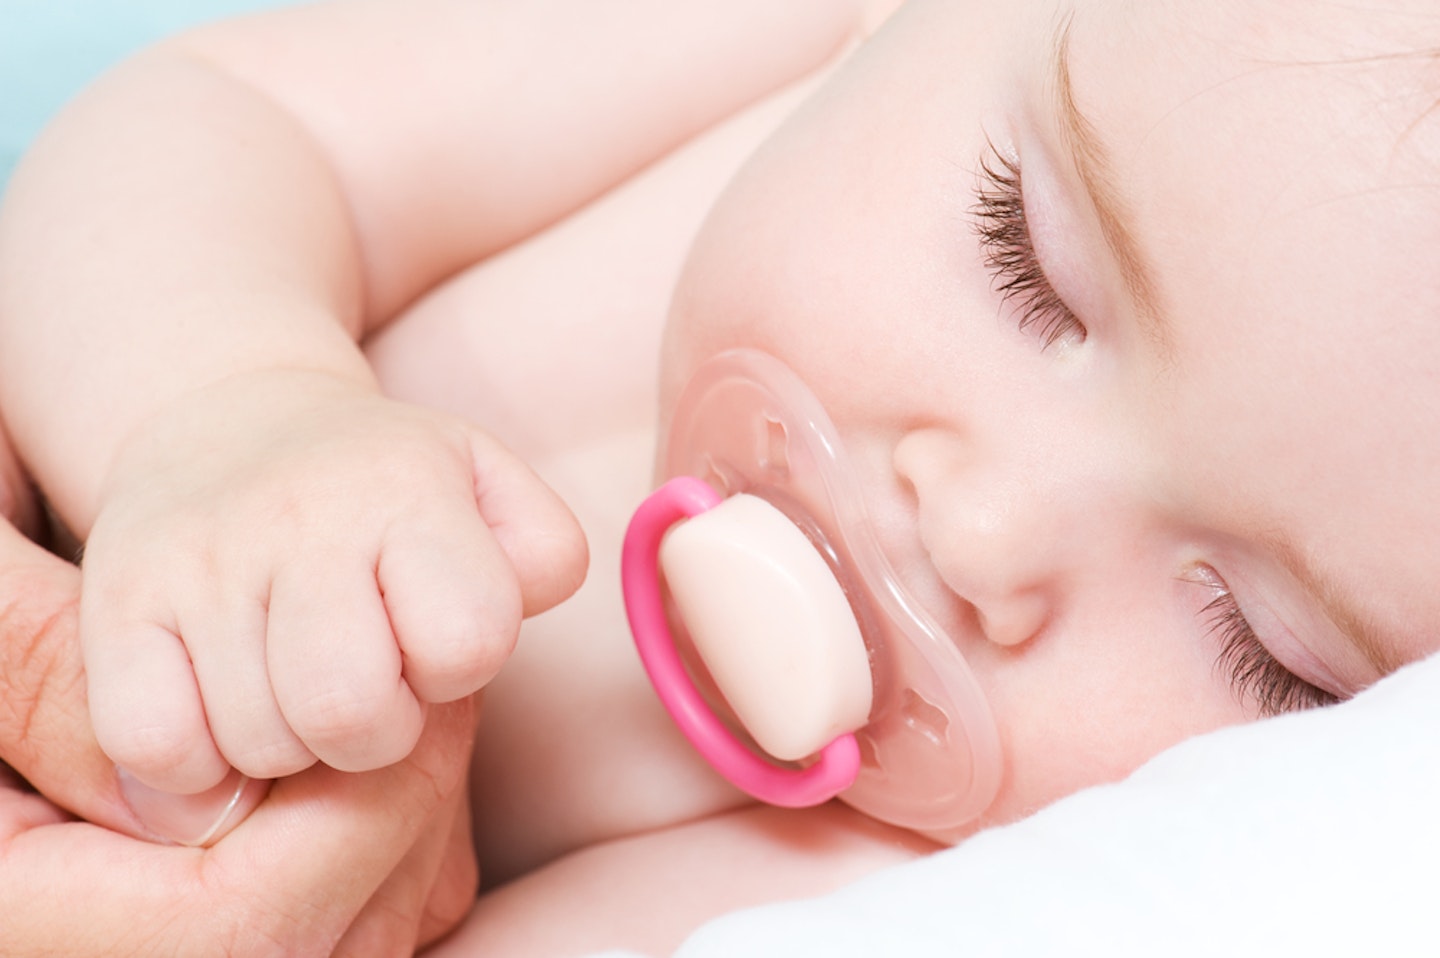 Baby dummy safety: everything you need to know